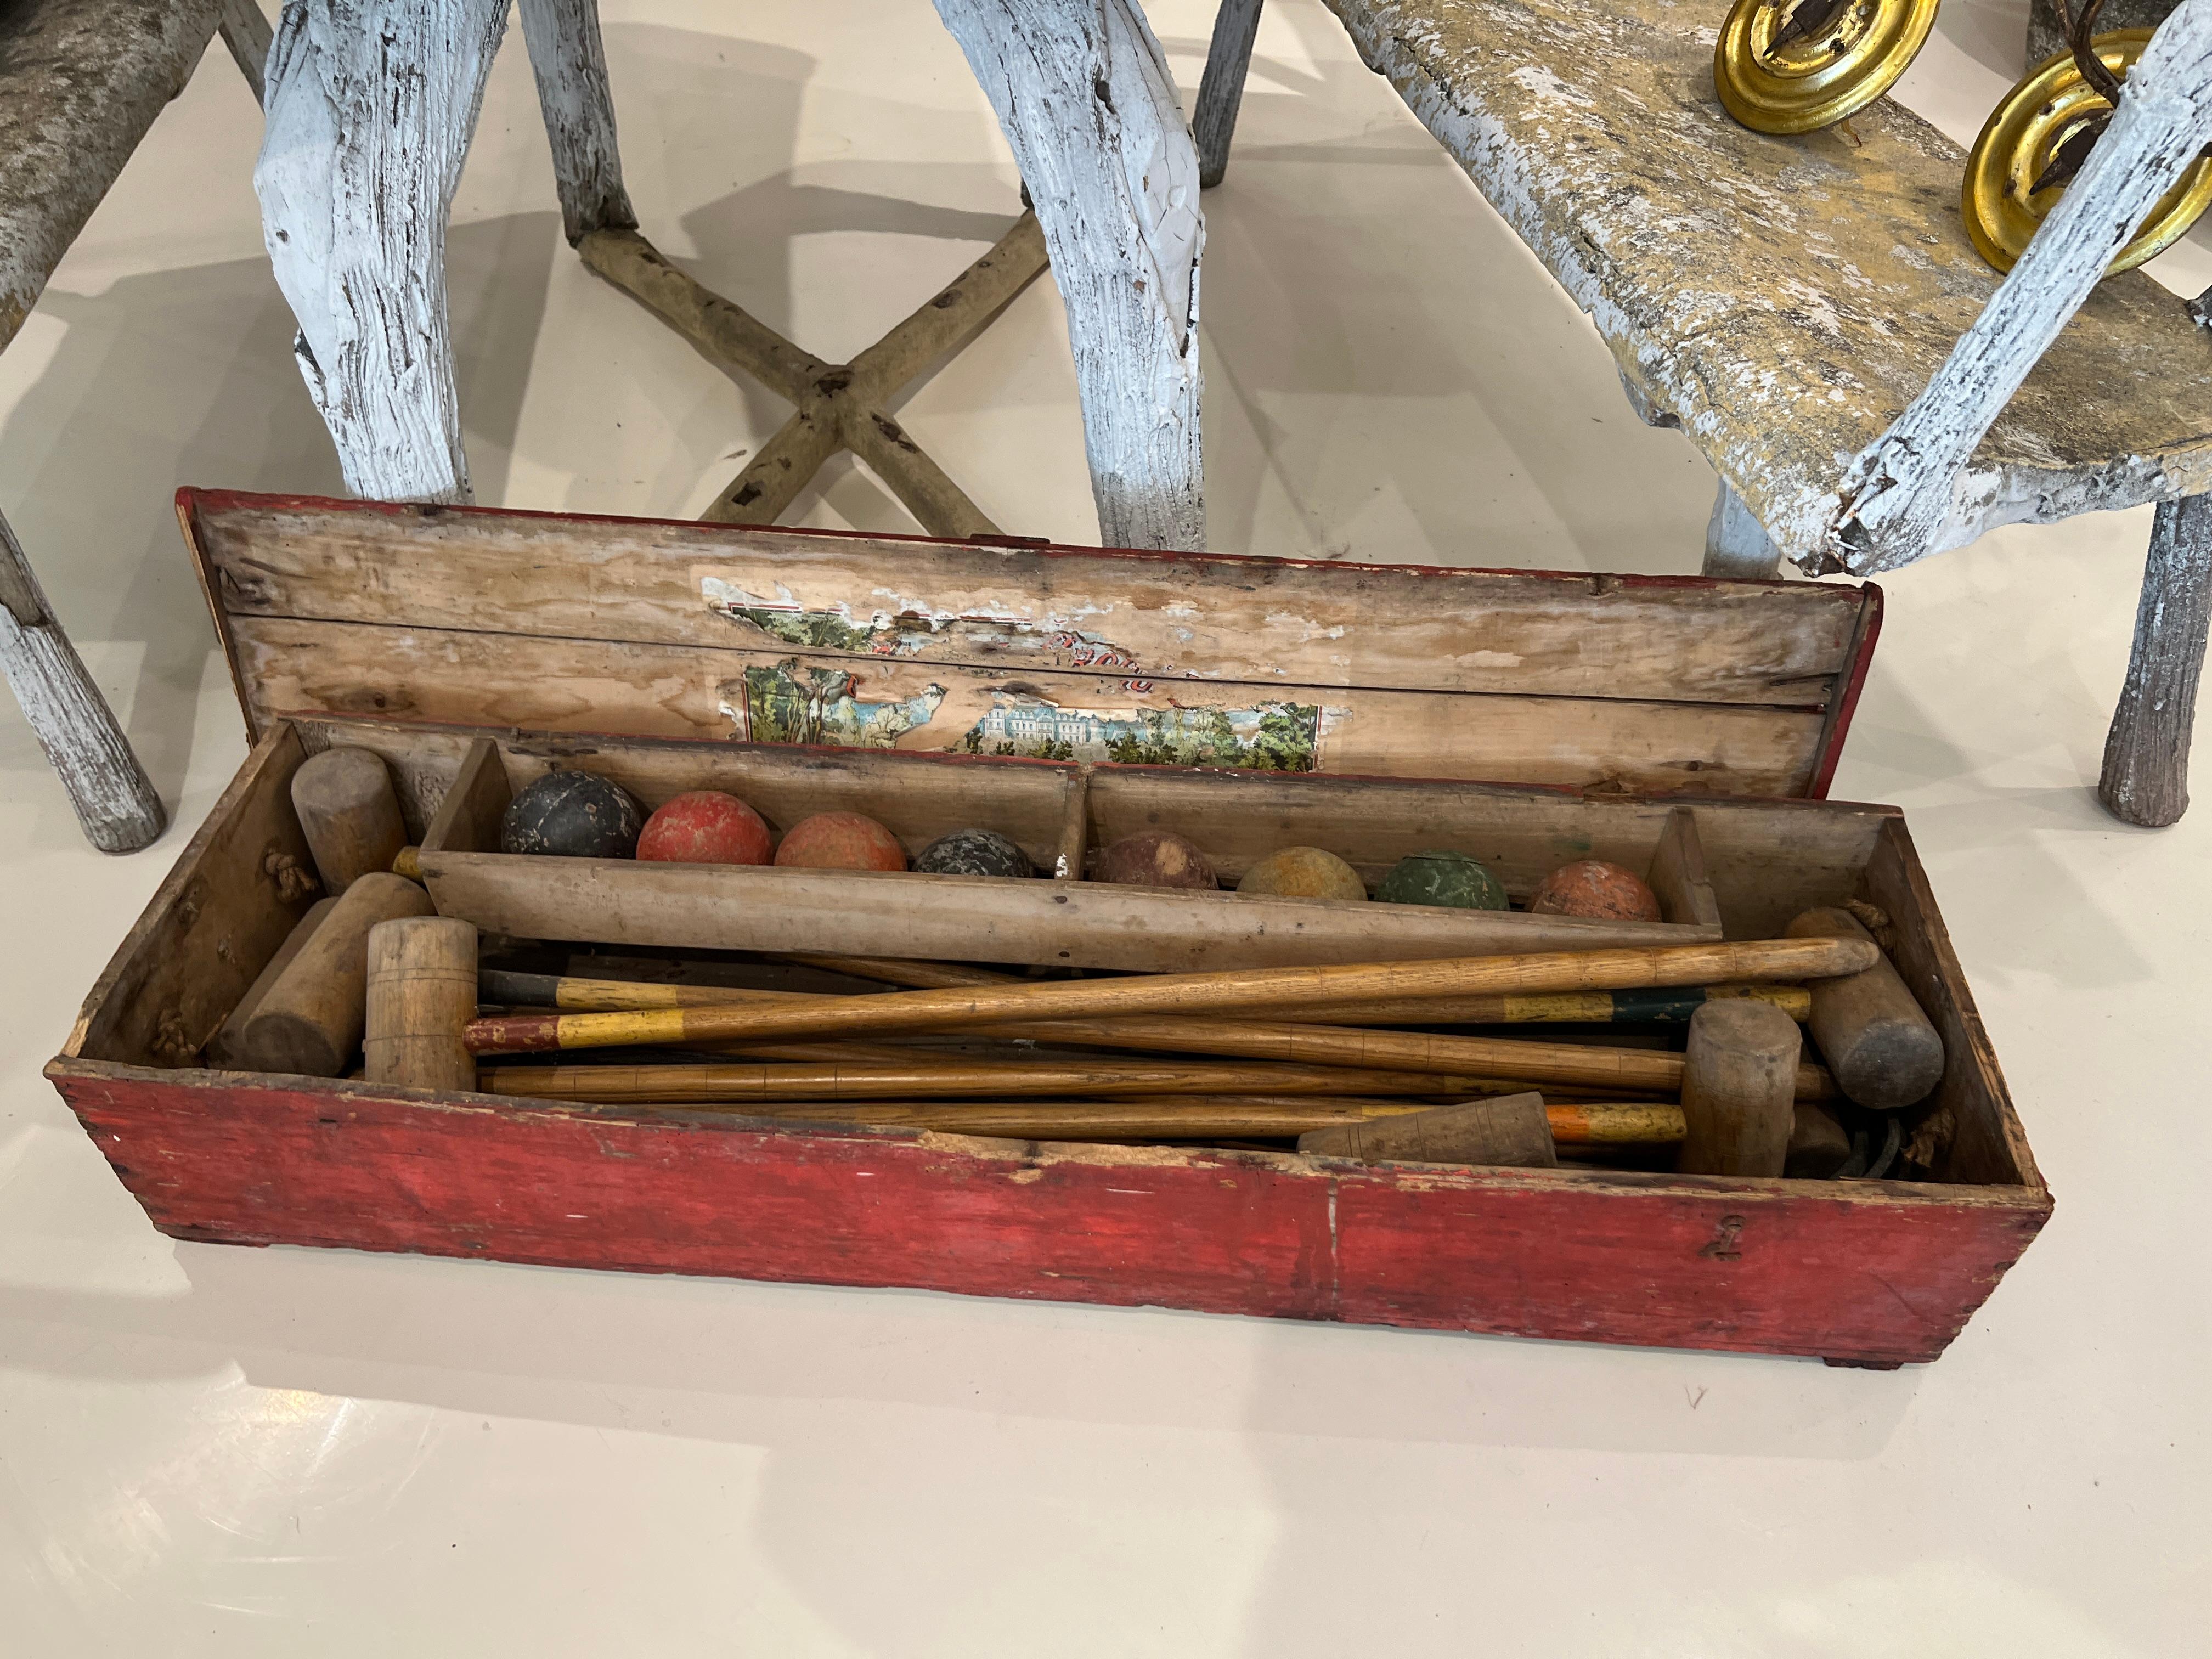 Vintage croquet set with original box and interior label. Spectacular set filled with family memories.

Wear consistent with age and use. Some loss to finish and label.